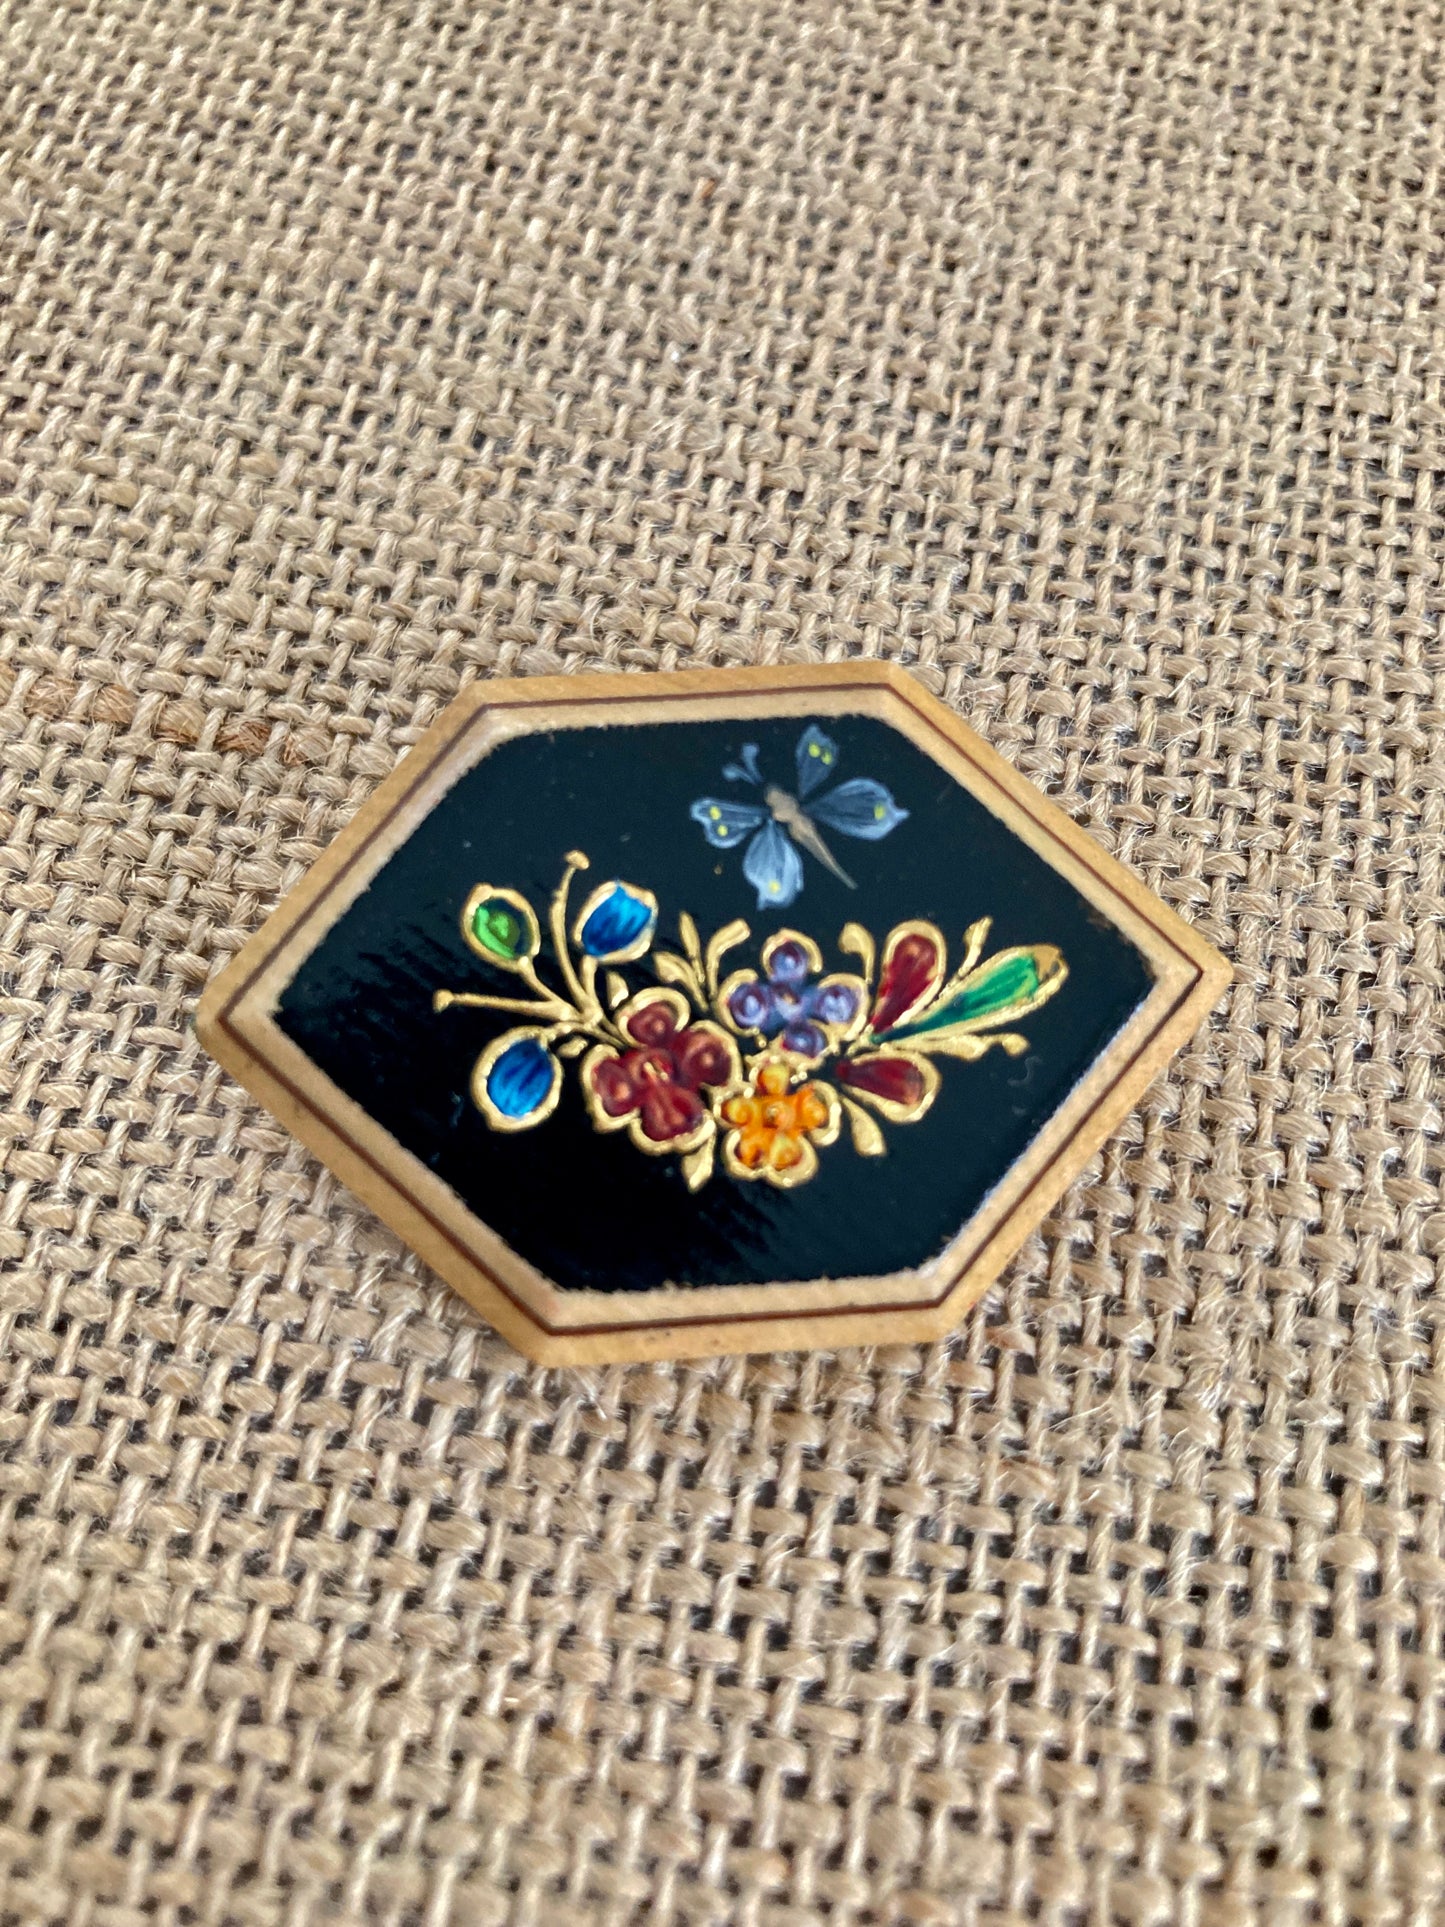 Hand Painted Floral Wood Brooch w/ Butterfly